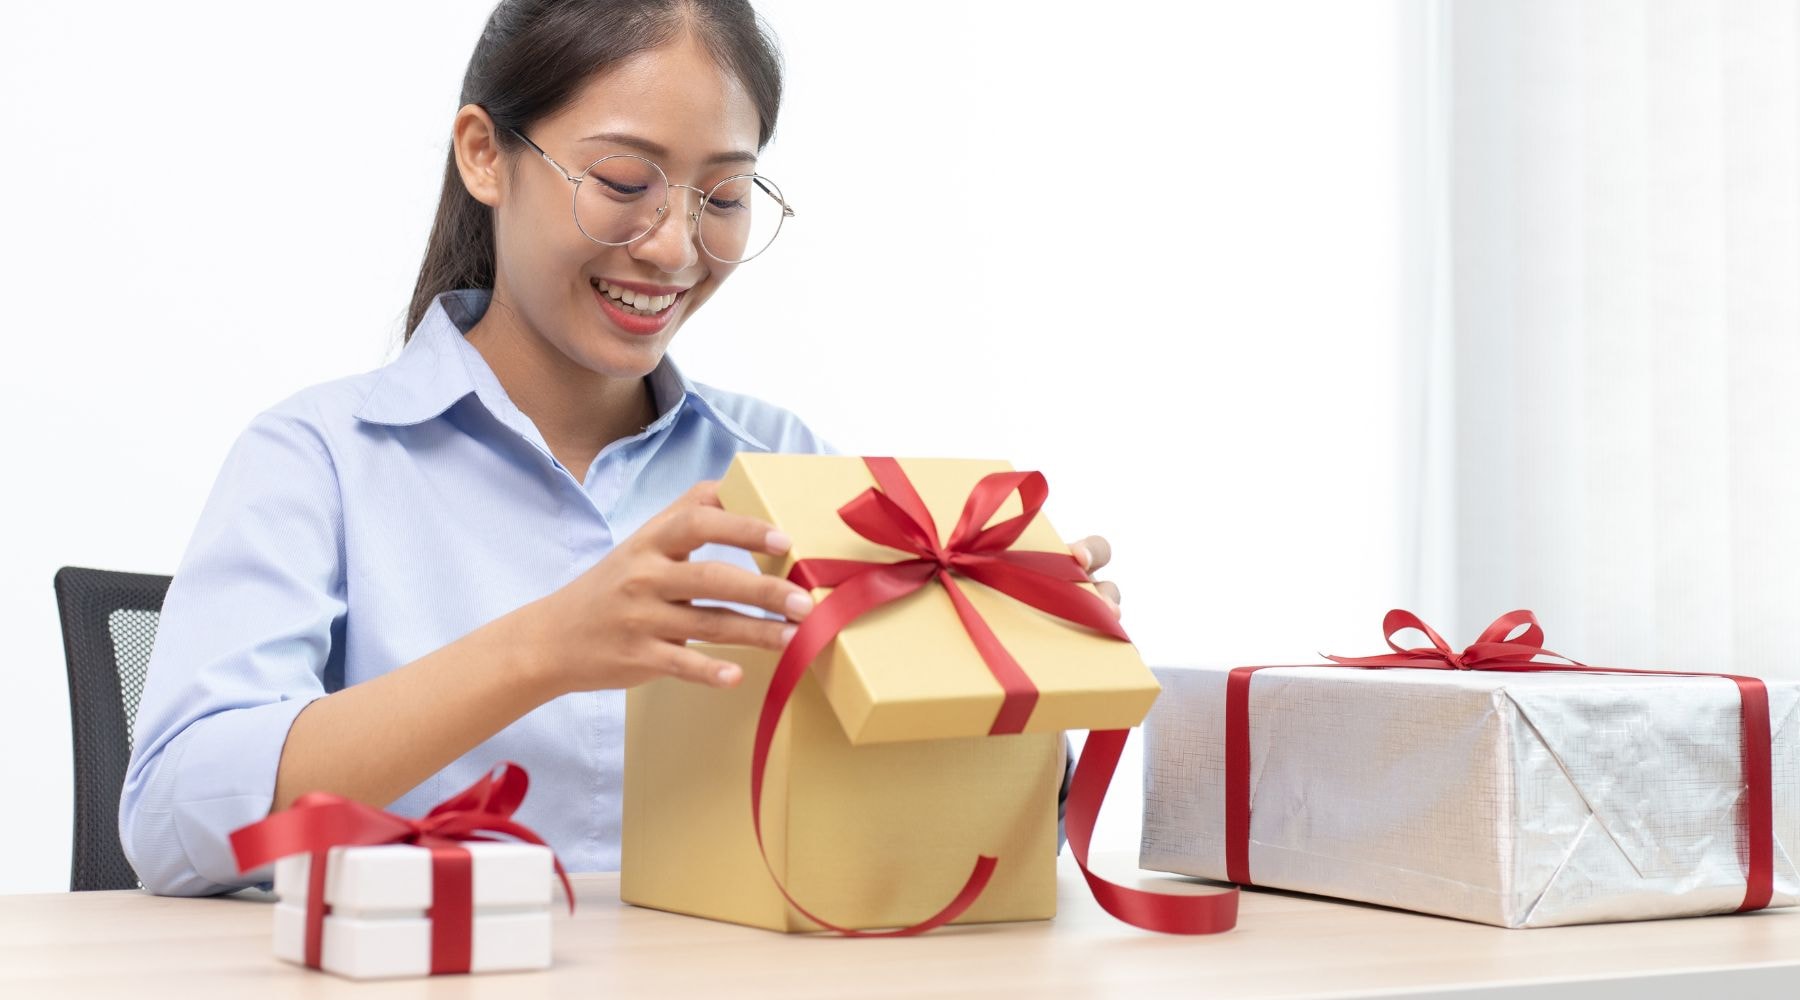 Excited young woman opening a large yellow gift box at her office desk.